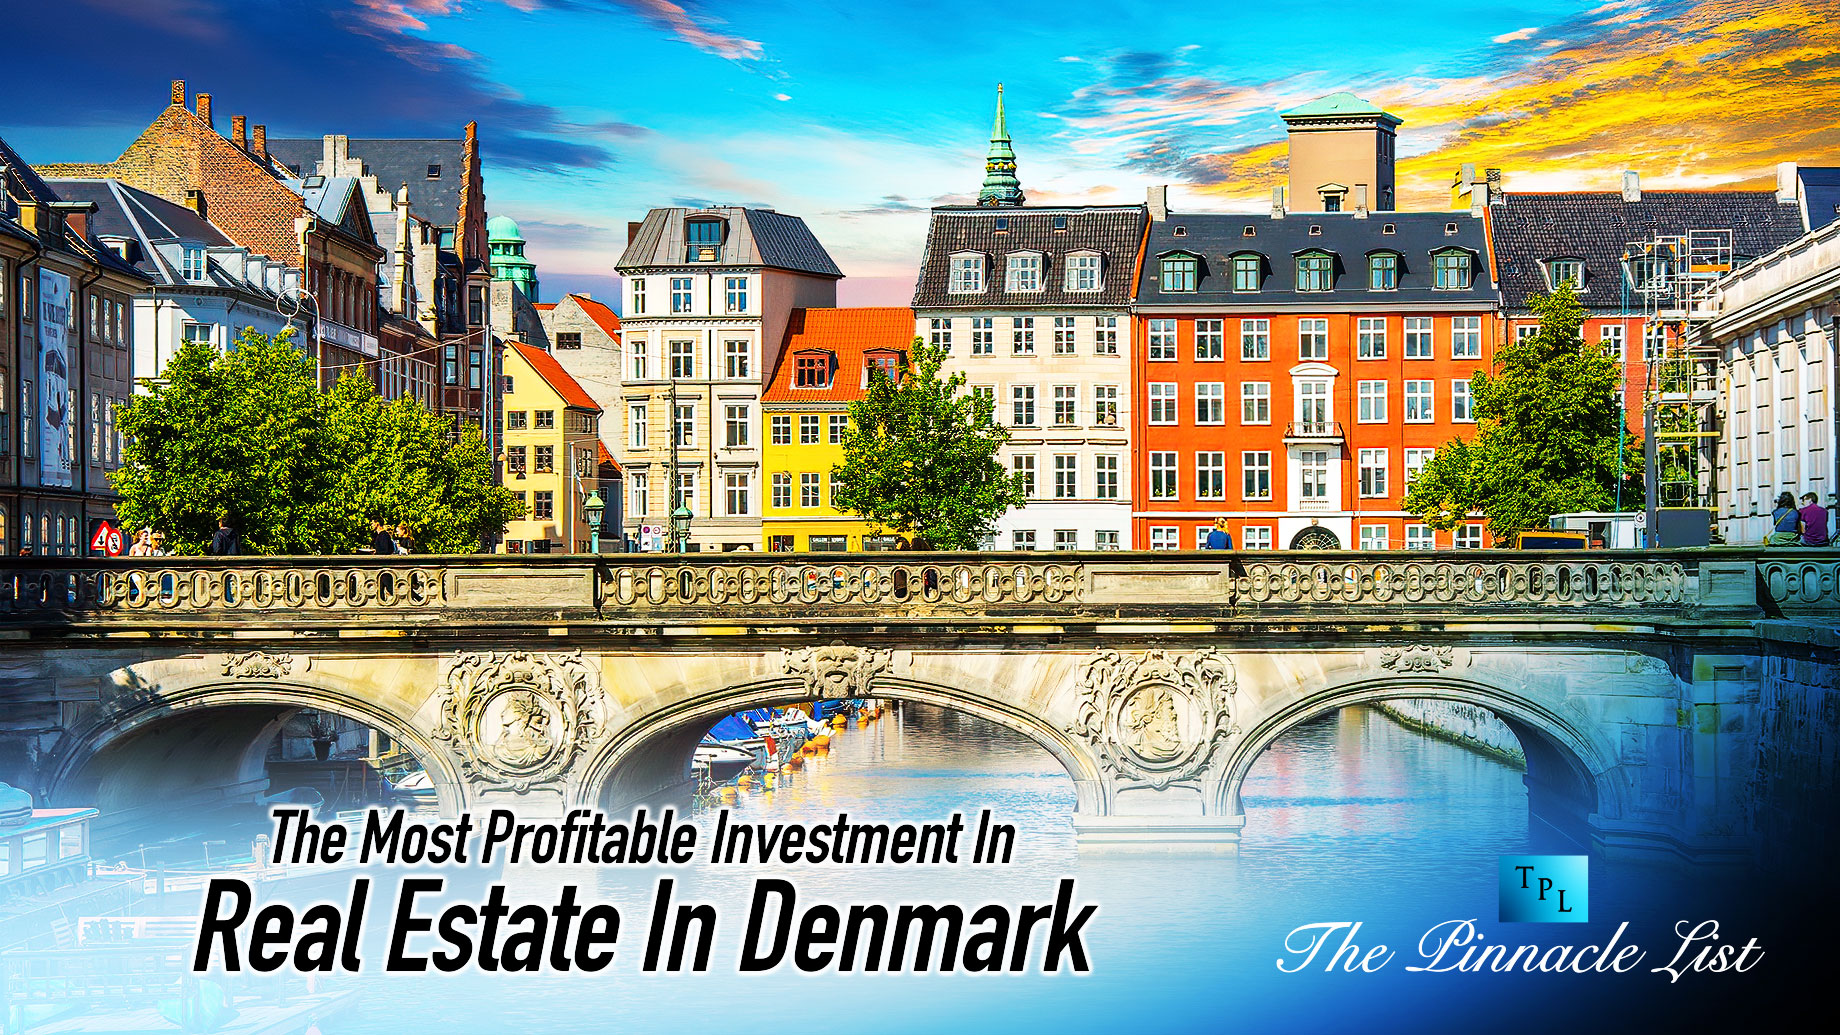 The Most Profitable Investment In Real Estate In Denmark